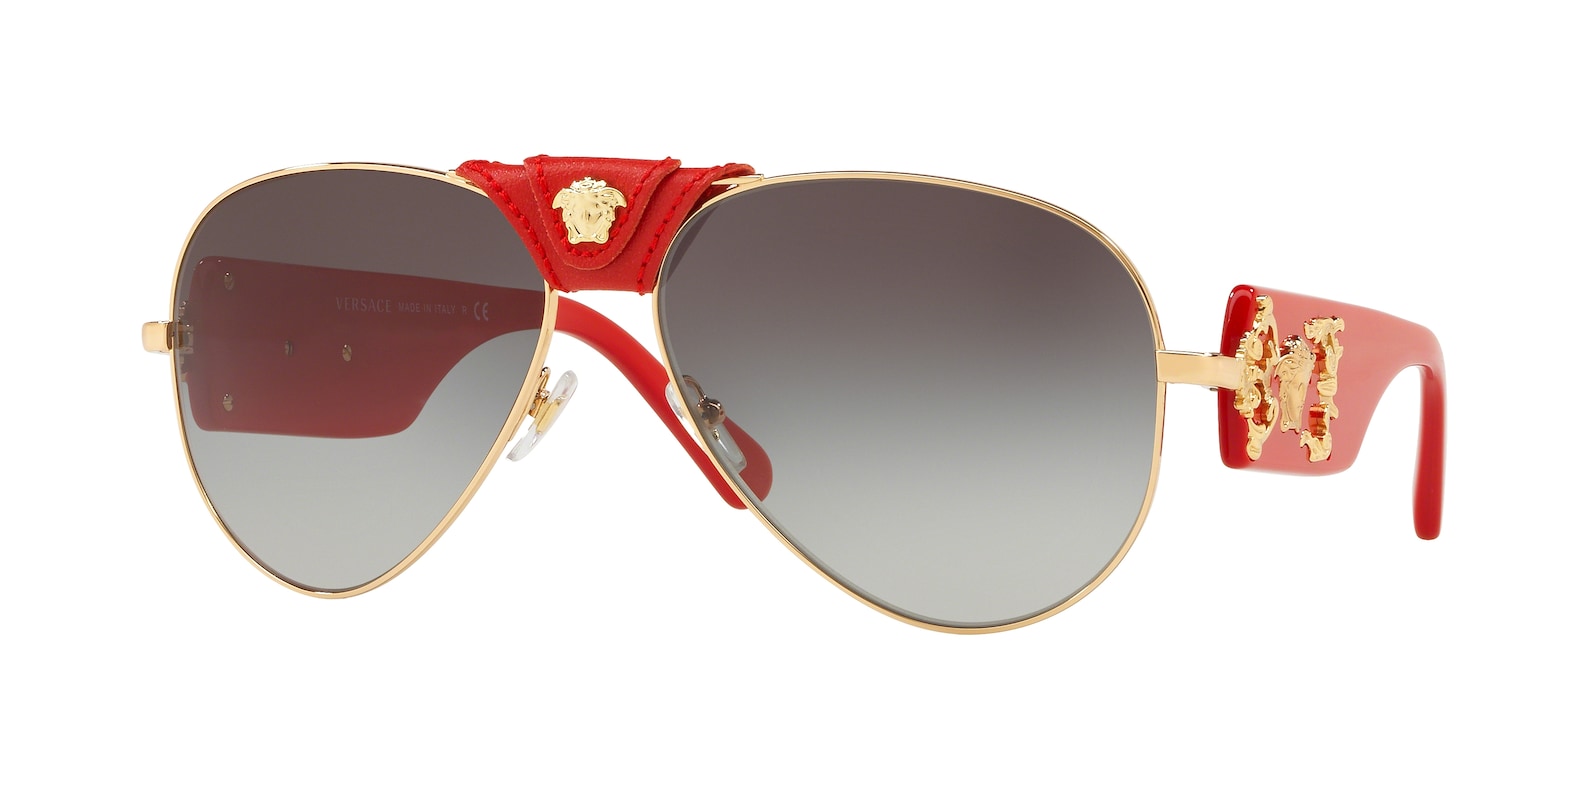 Versace Glasses With Red and Gold Detailing